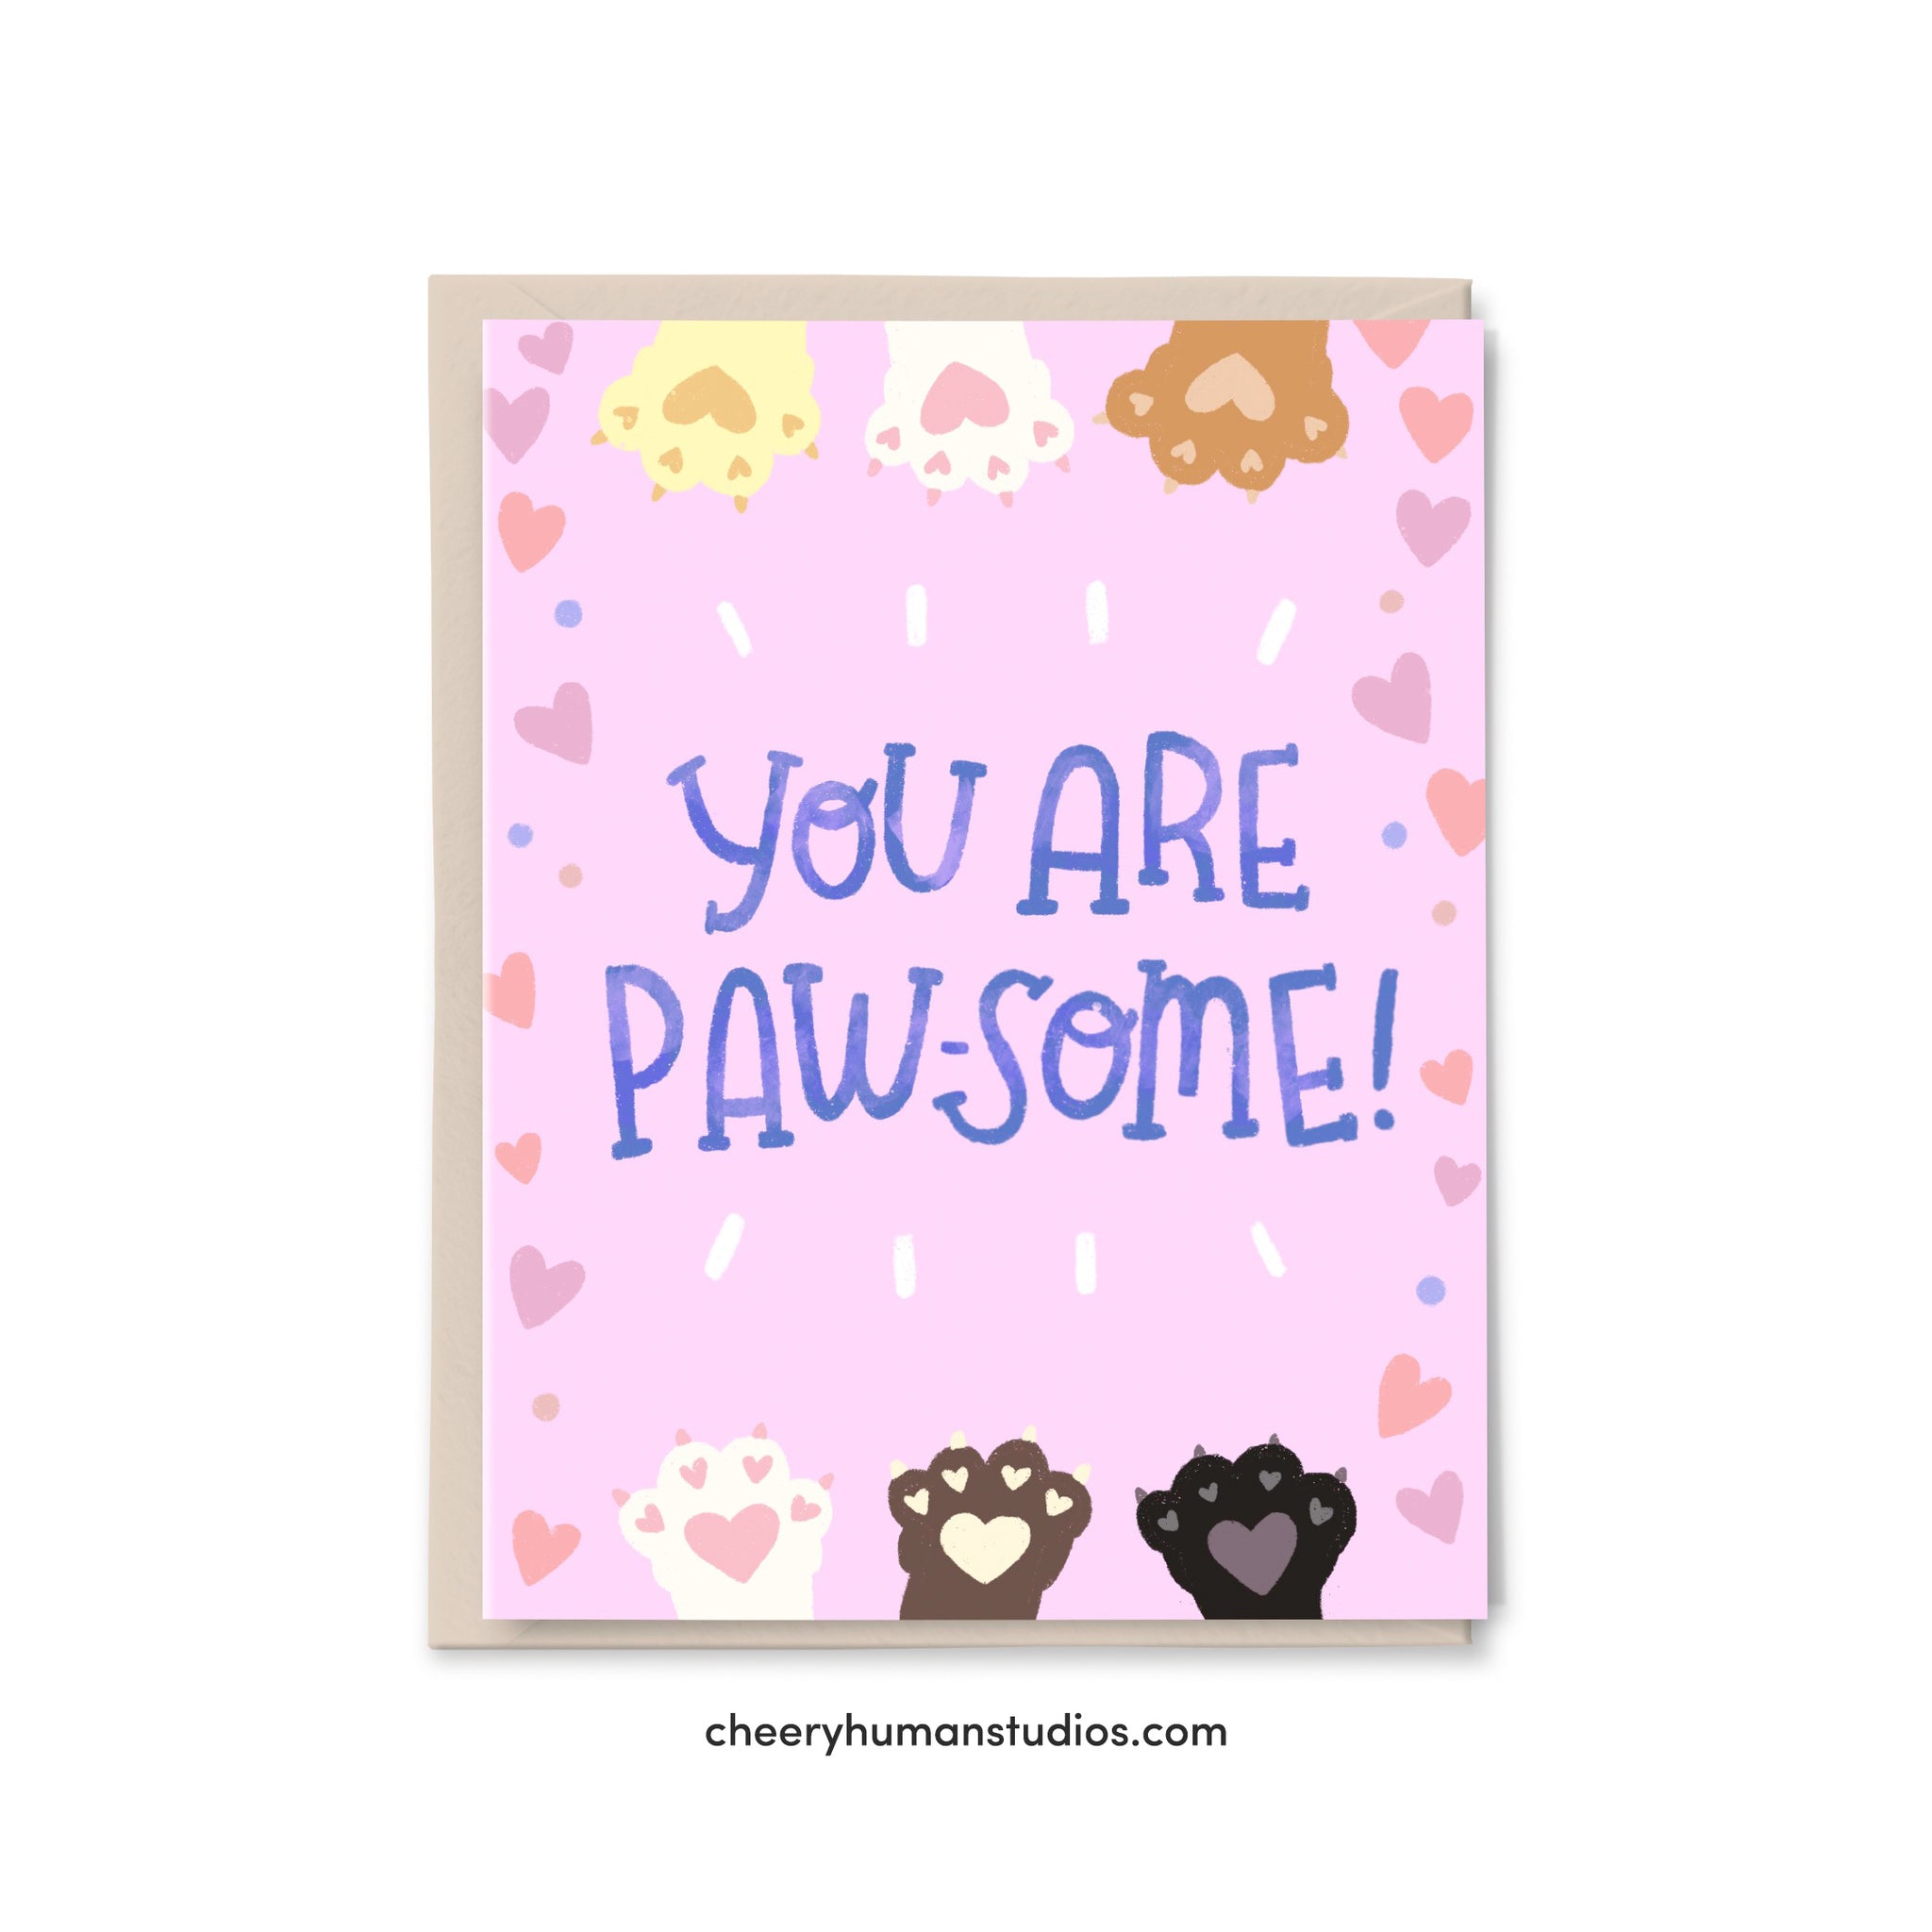 You are Pawsome  |  Friendship Greeting Card | Greeting Card | Love Greeting Card